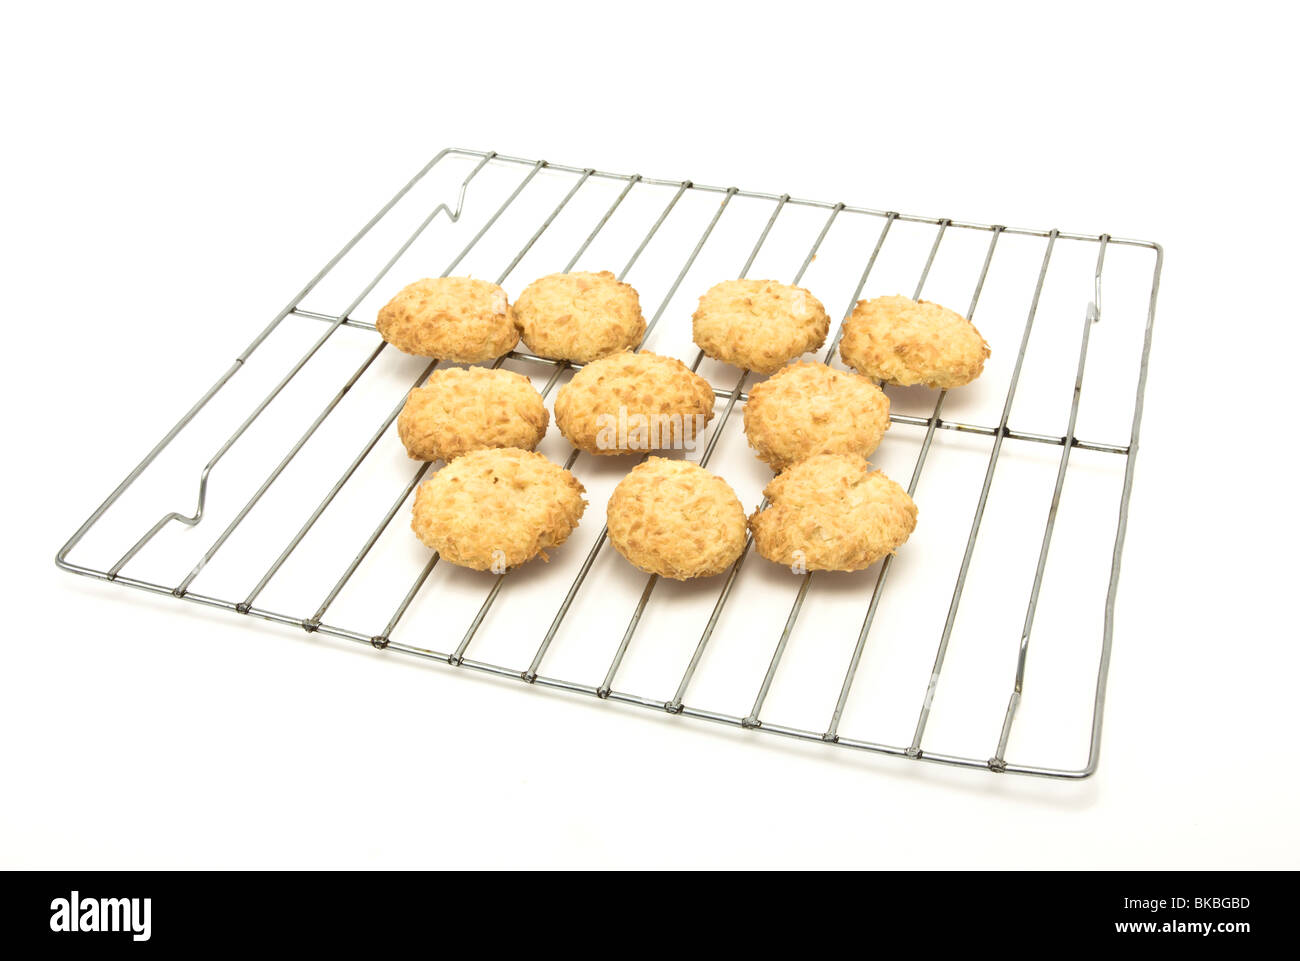 Home baked coconut cookies called melting moments from low viewpoint on cooling rack. Stock Photo